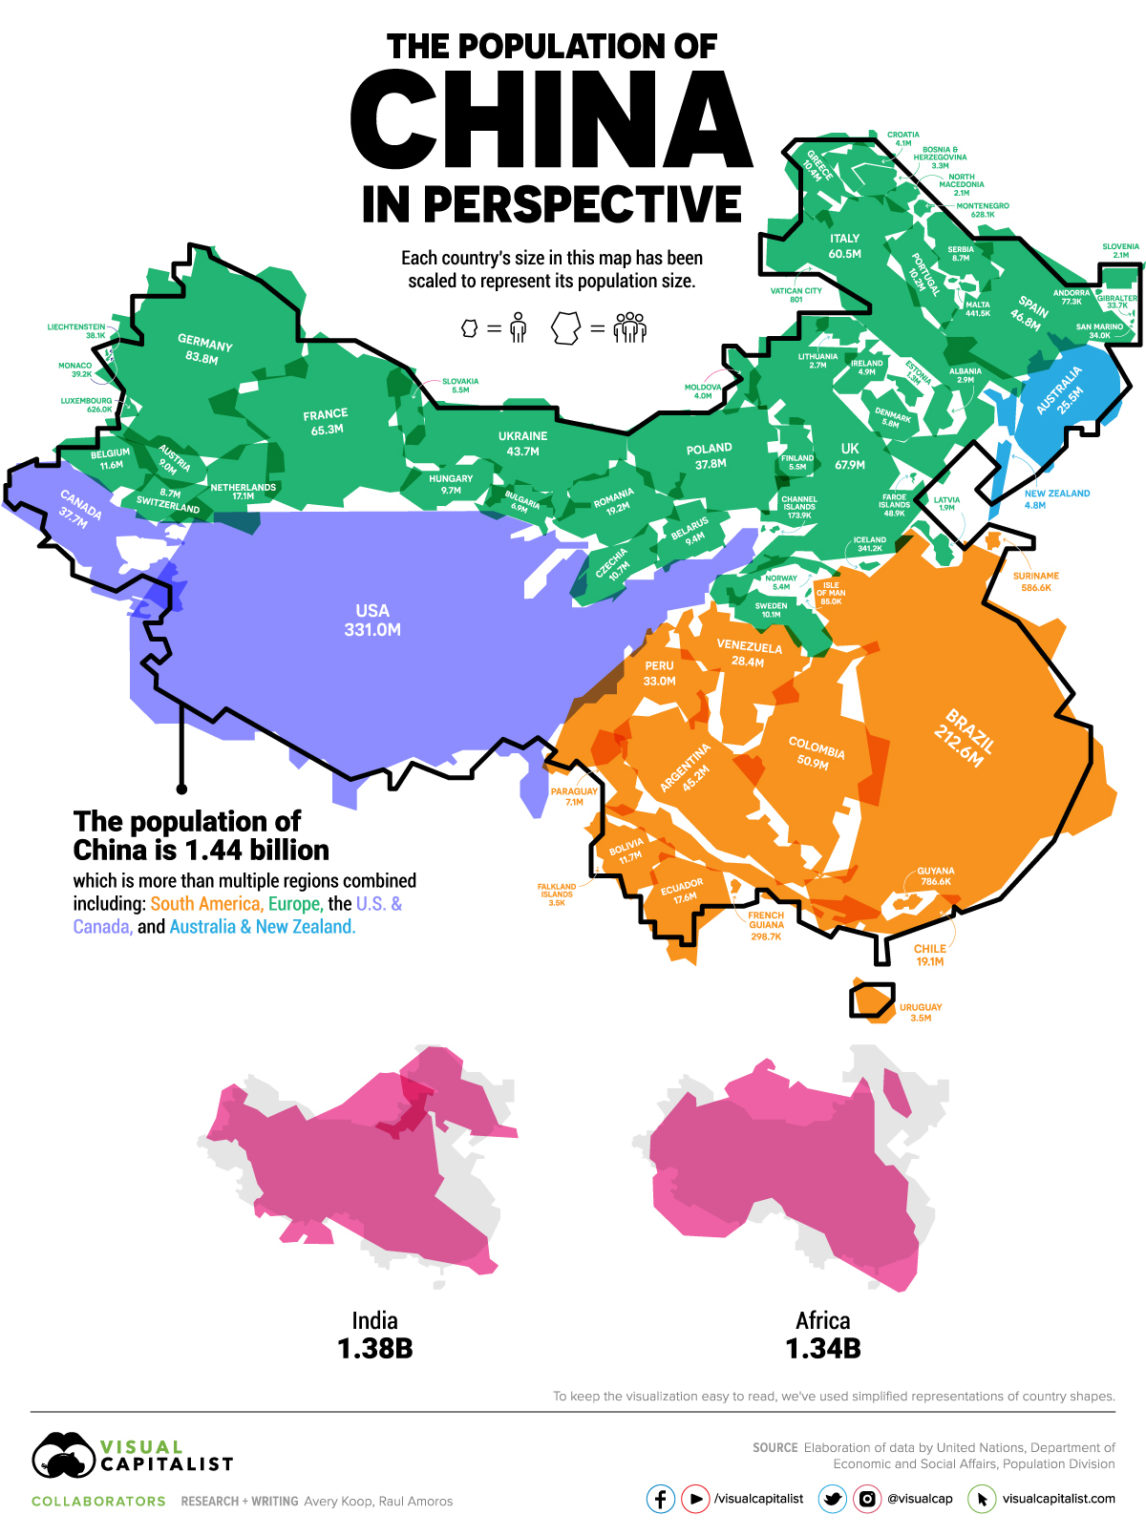 The Population of China Compared with the Rest of the World